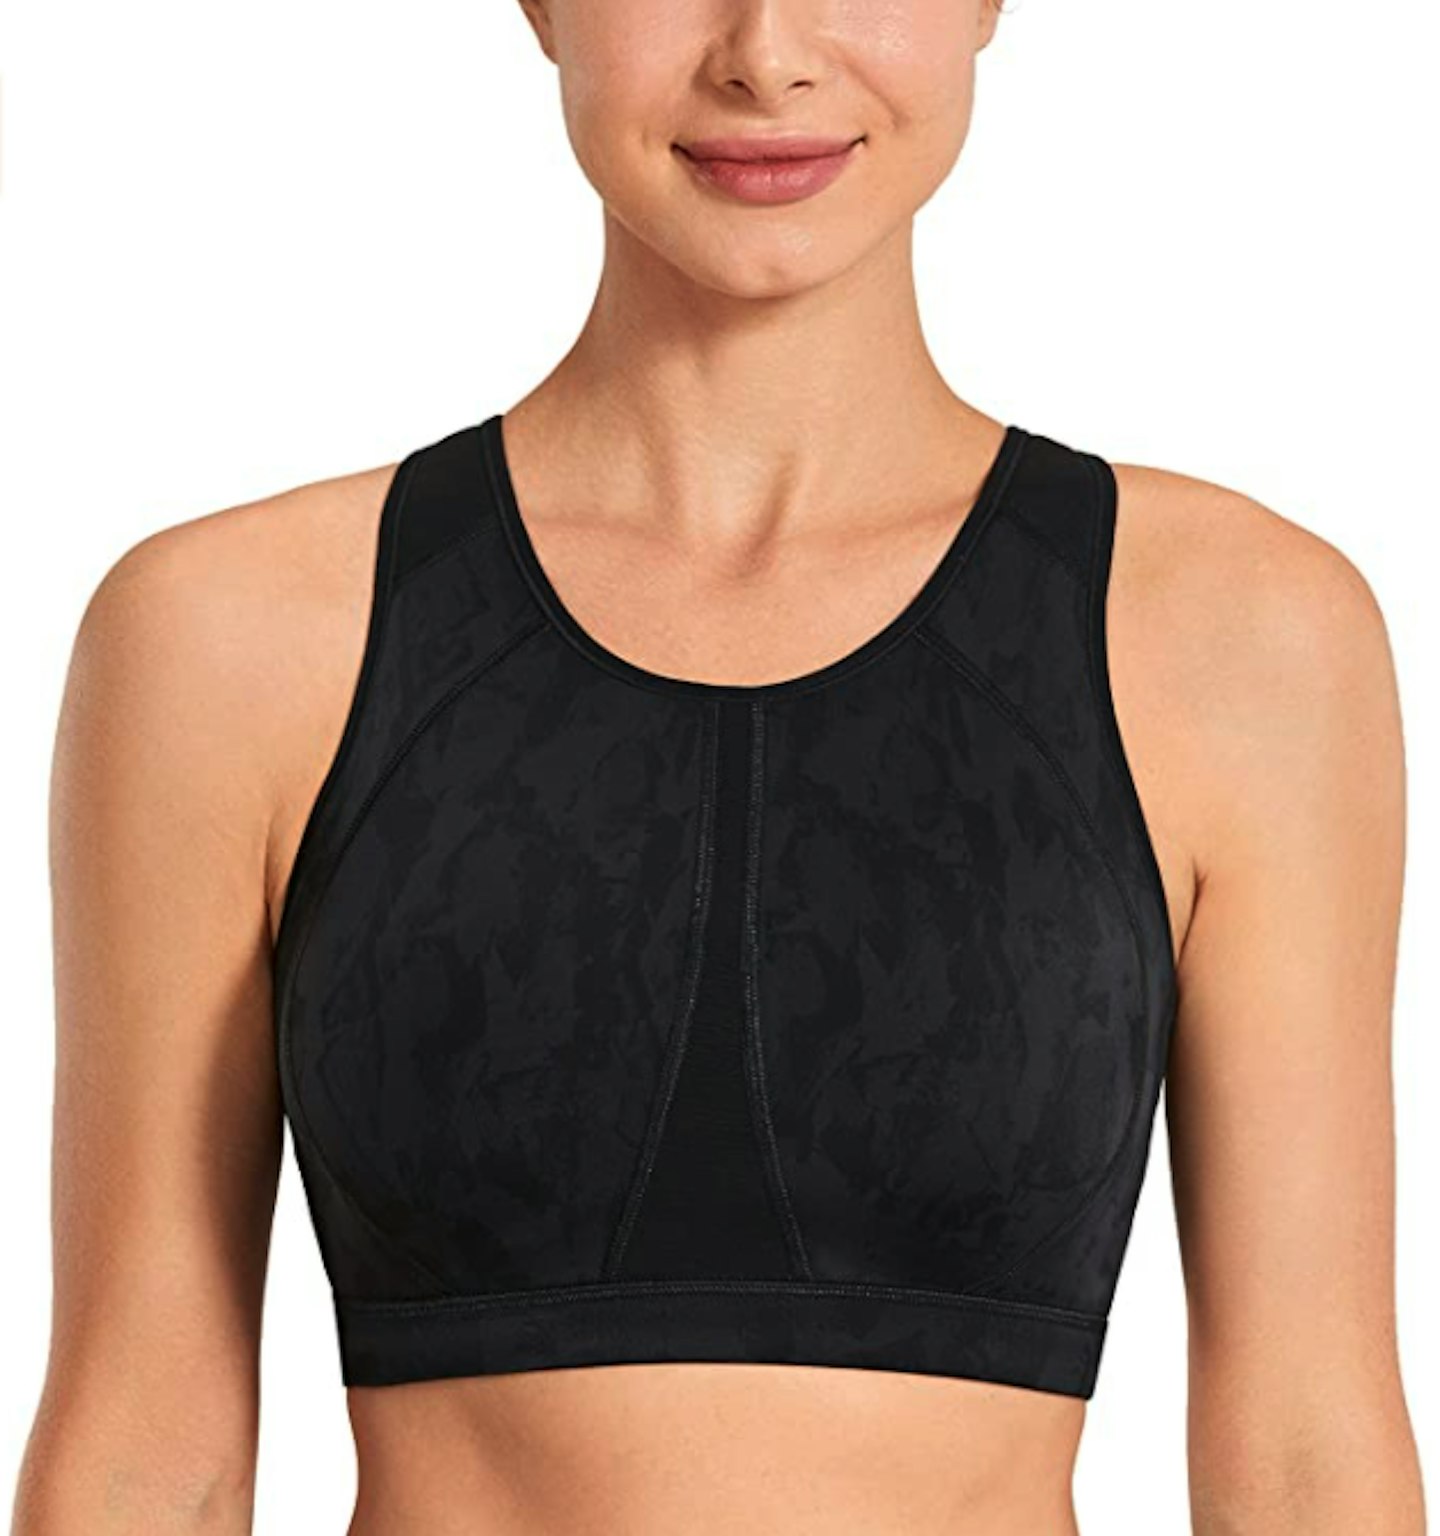 SYROKAN, Women's High Impact Padded Supportive Wirefree Full Coverage Sports Bra, £16